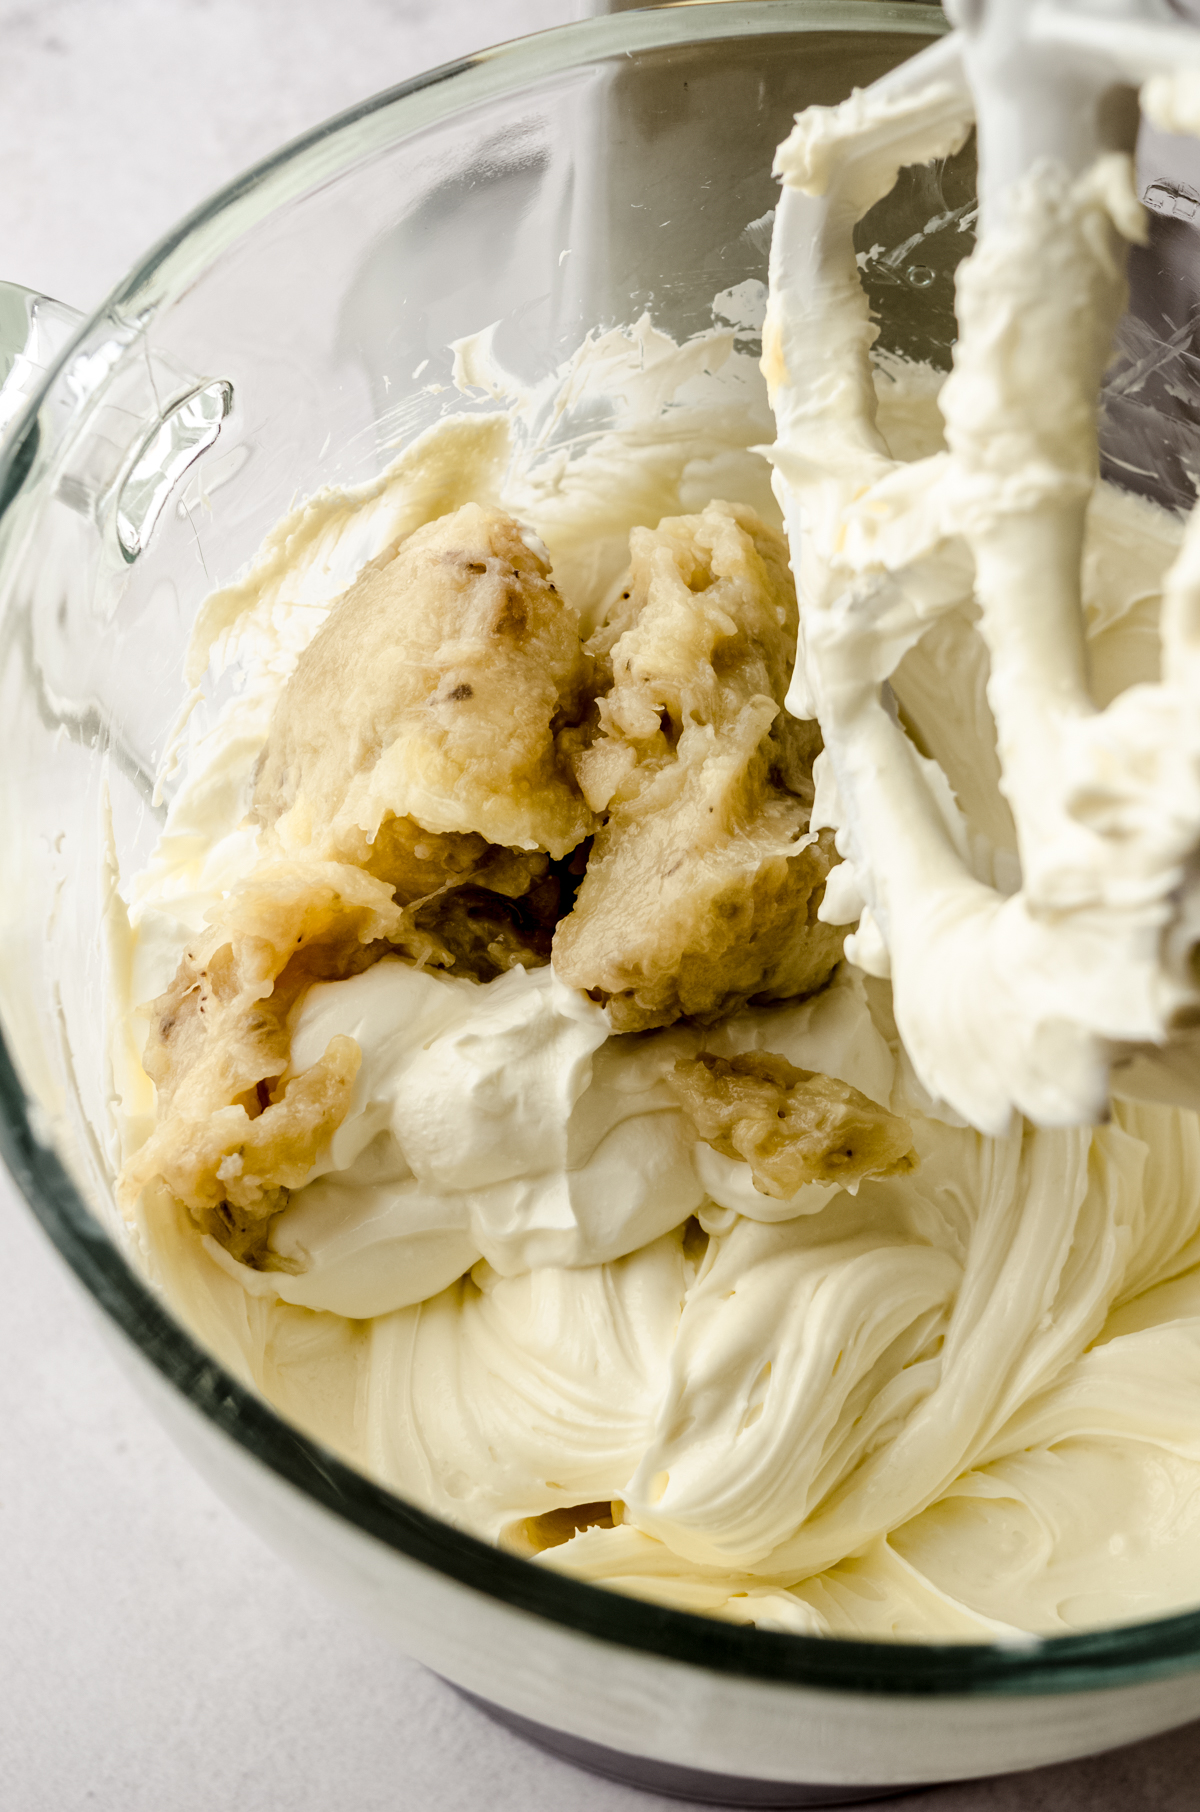 The bowl of a stand mixed filled with cheesecake filling and mashed roasted bananas dropped into the batter.